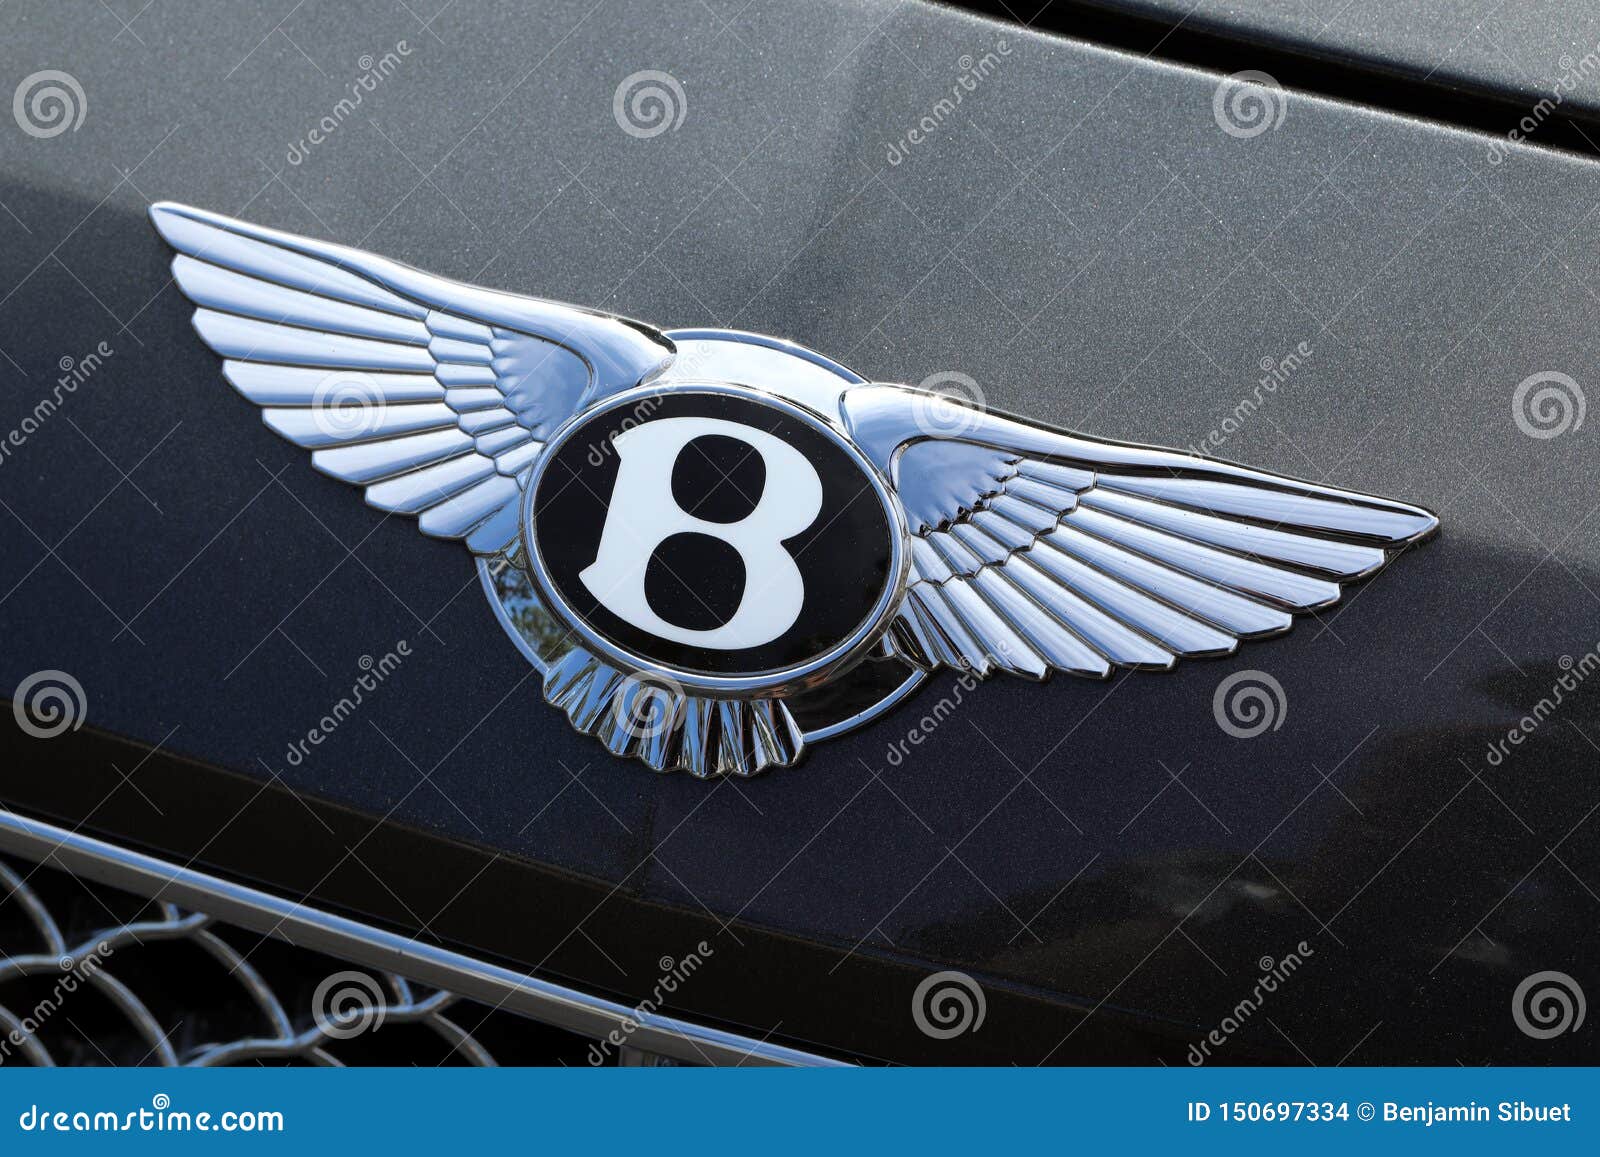 Famous Bentley Logo on the Bonnet of a Black Car Editorial Stock ...